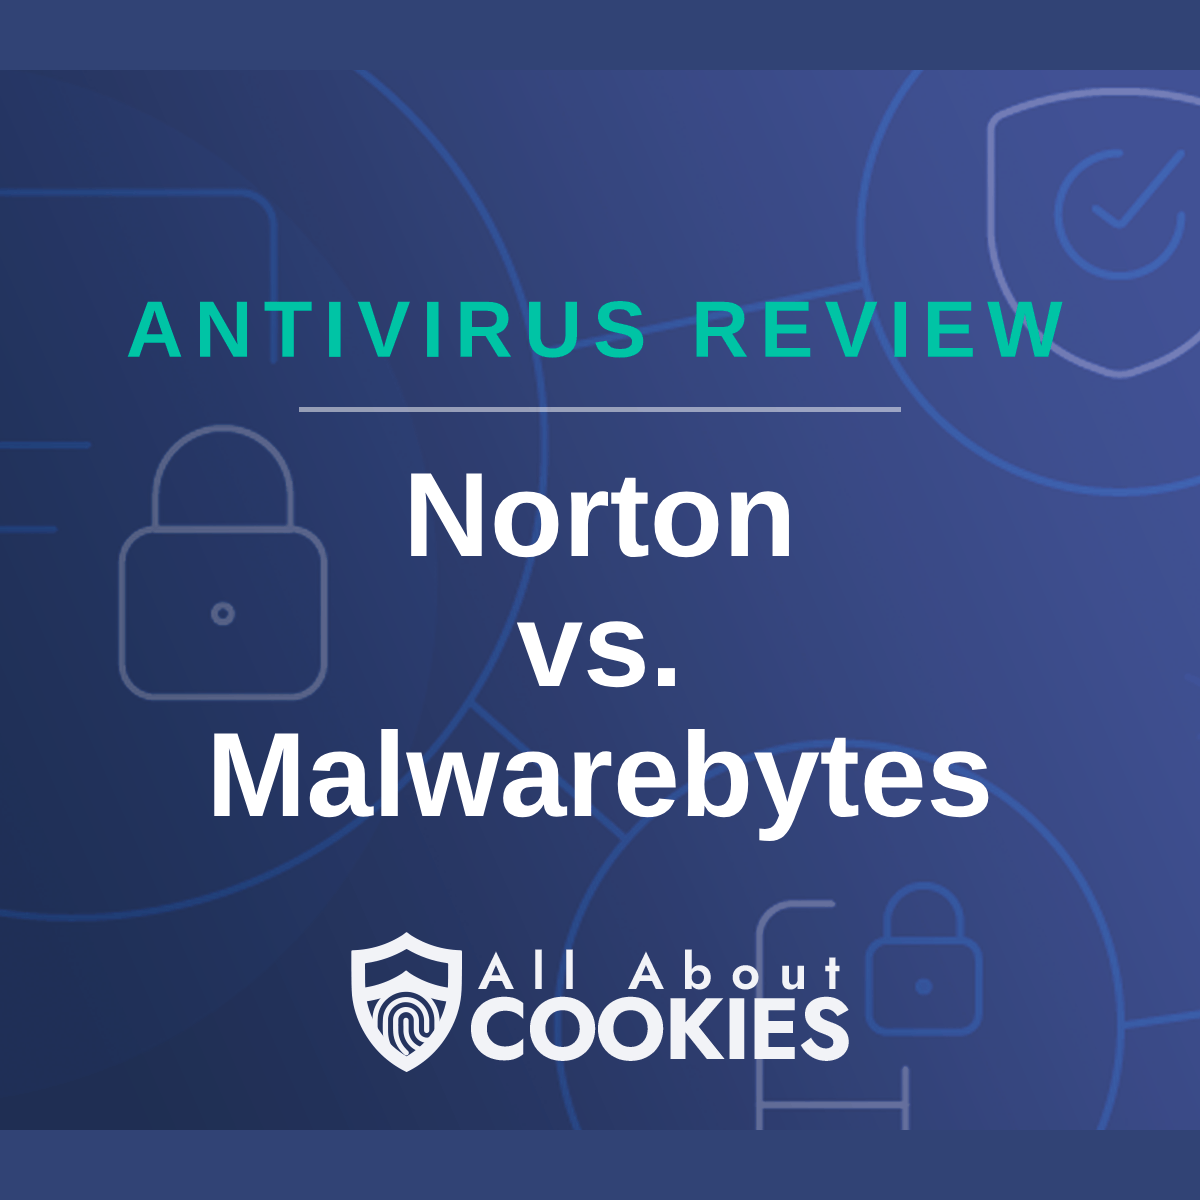 A blue background with images of locks and shields with the text "Norton vs. Malwarebytes" and the All About Cookies logo. 